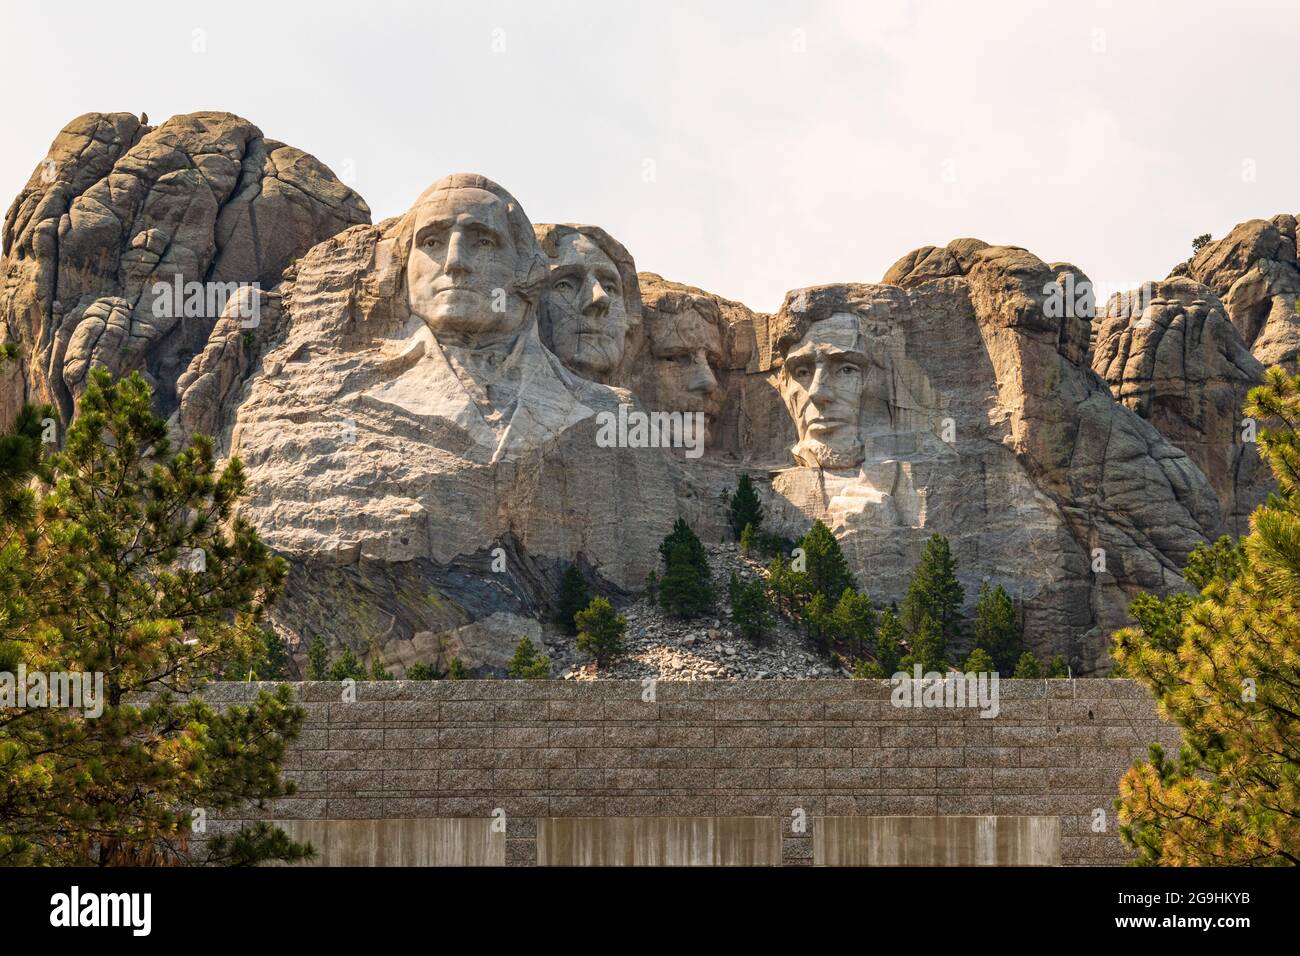 Views of Mt. Rushmore National Monument Stock Photo